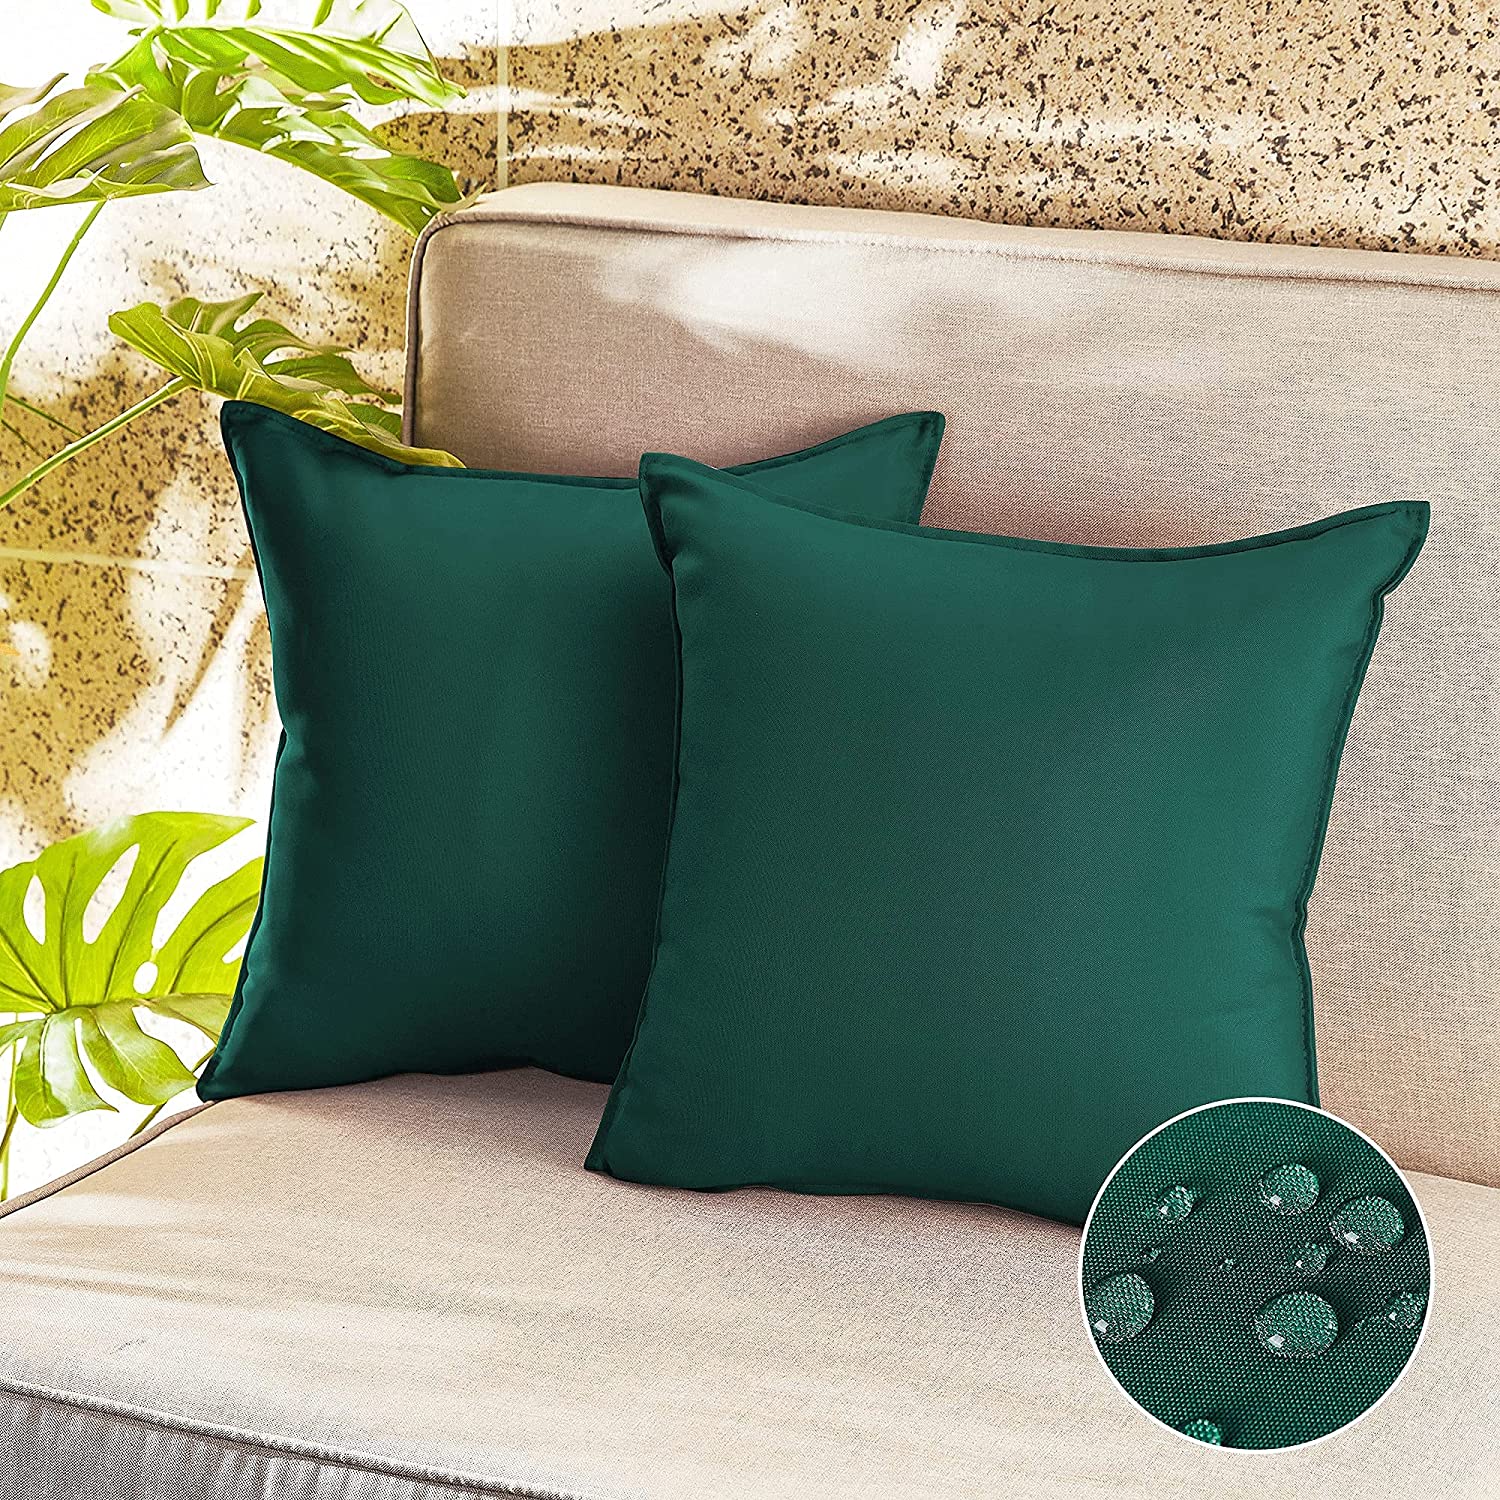 Waterproof Outdoor Pillow Covers Square Cushion Throw Pillowcase 2 Pcs for Christmas KGORGE Store